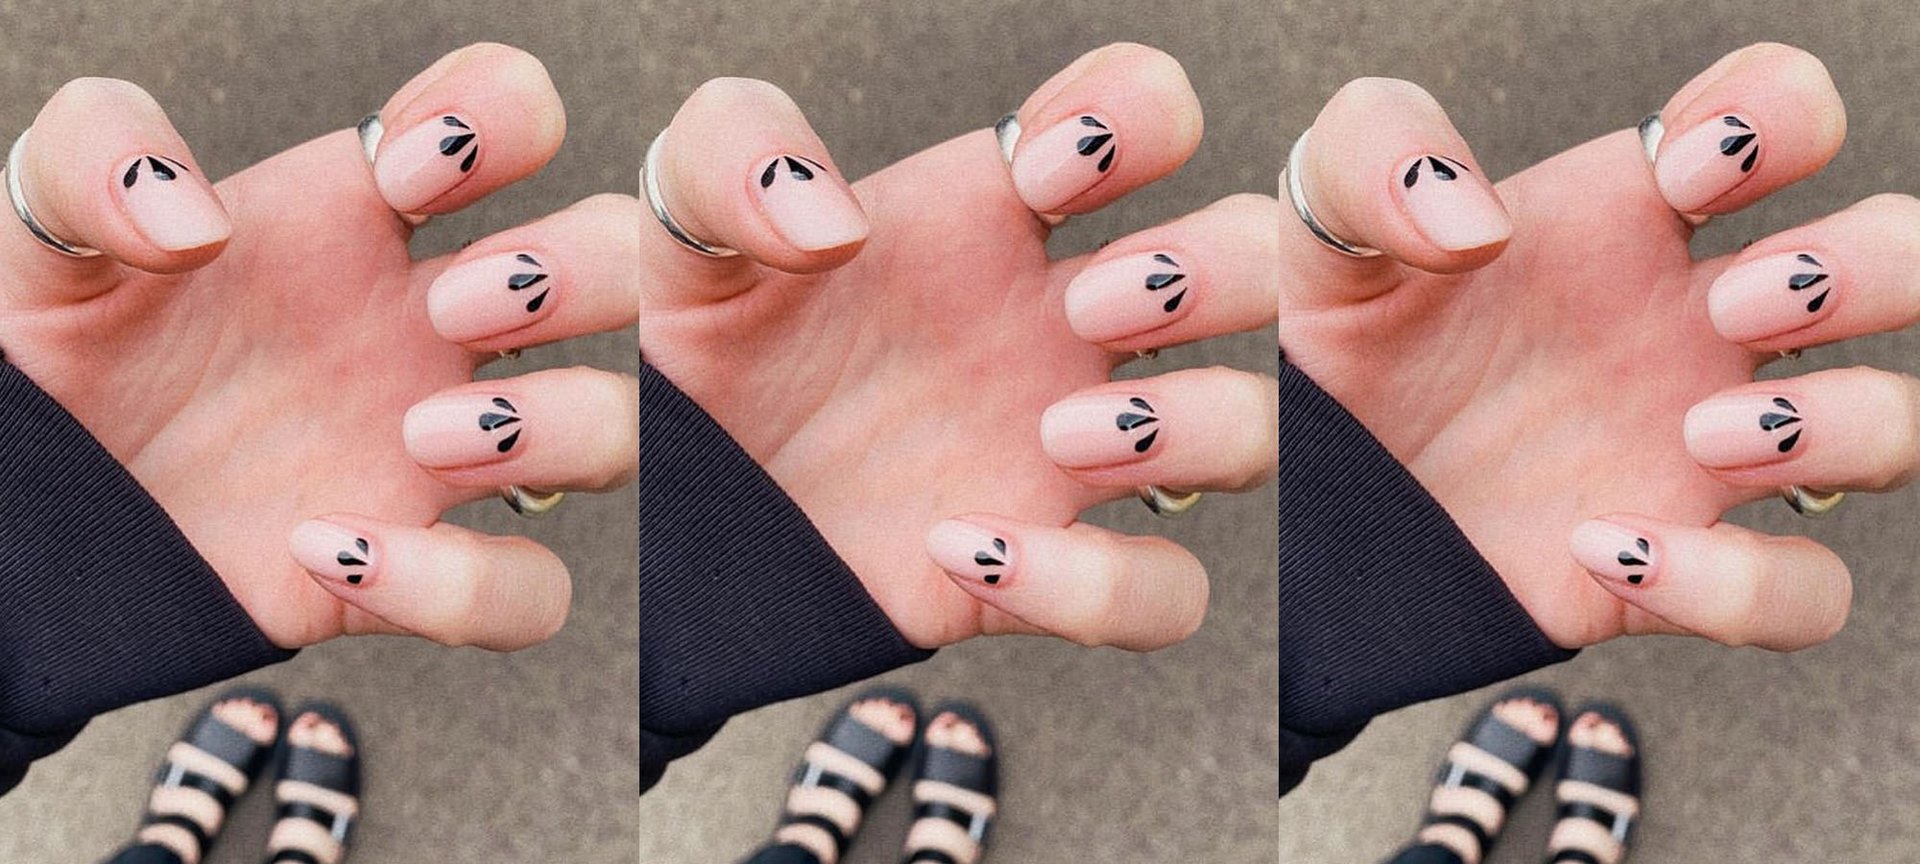 Easy Pink and Black Nails Tutorial Using Sponge Technique